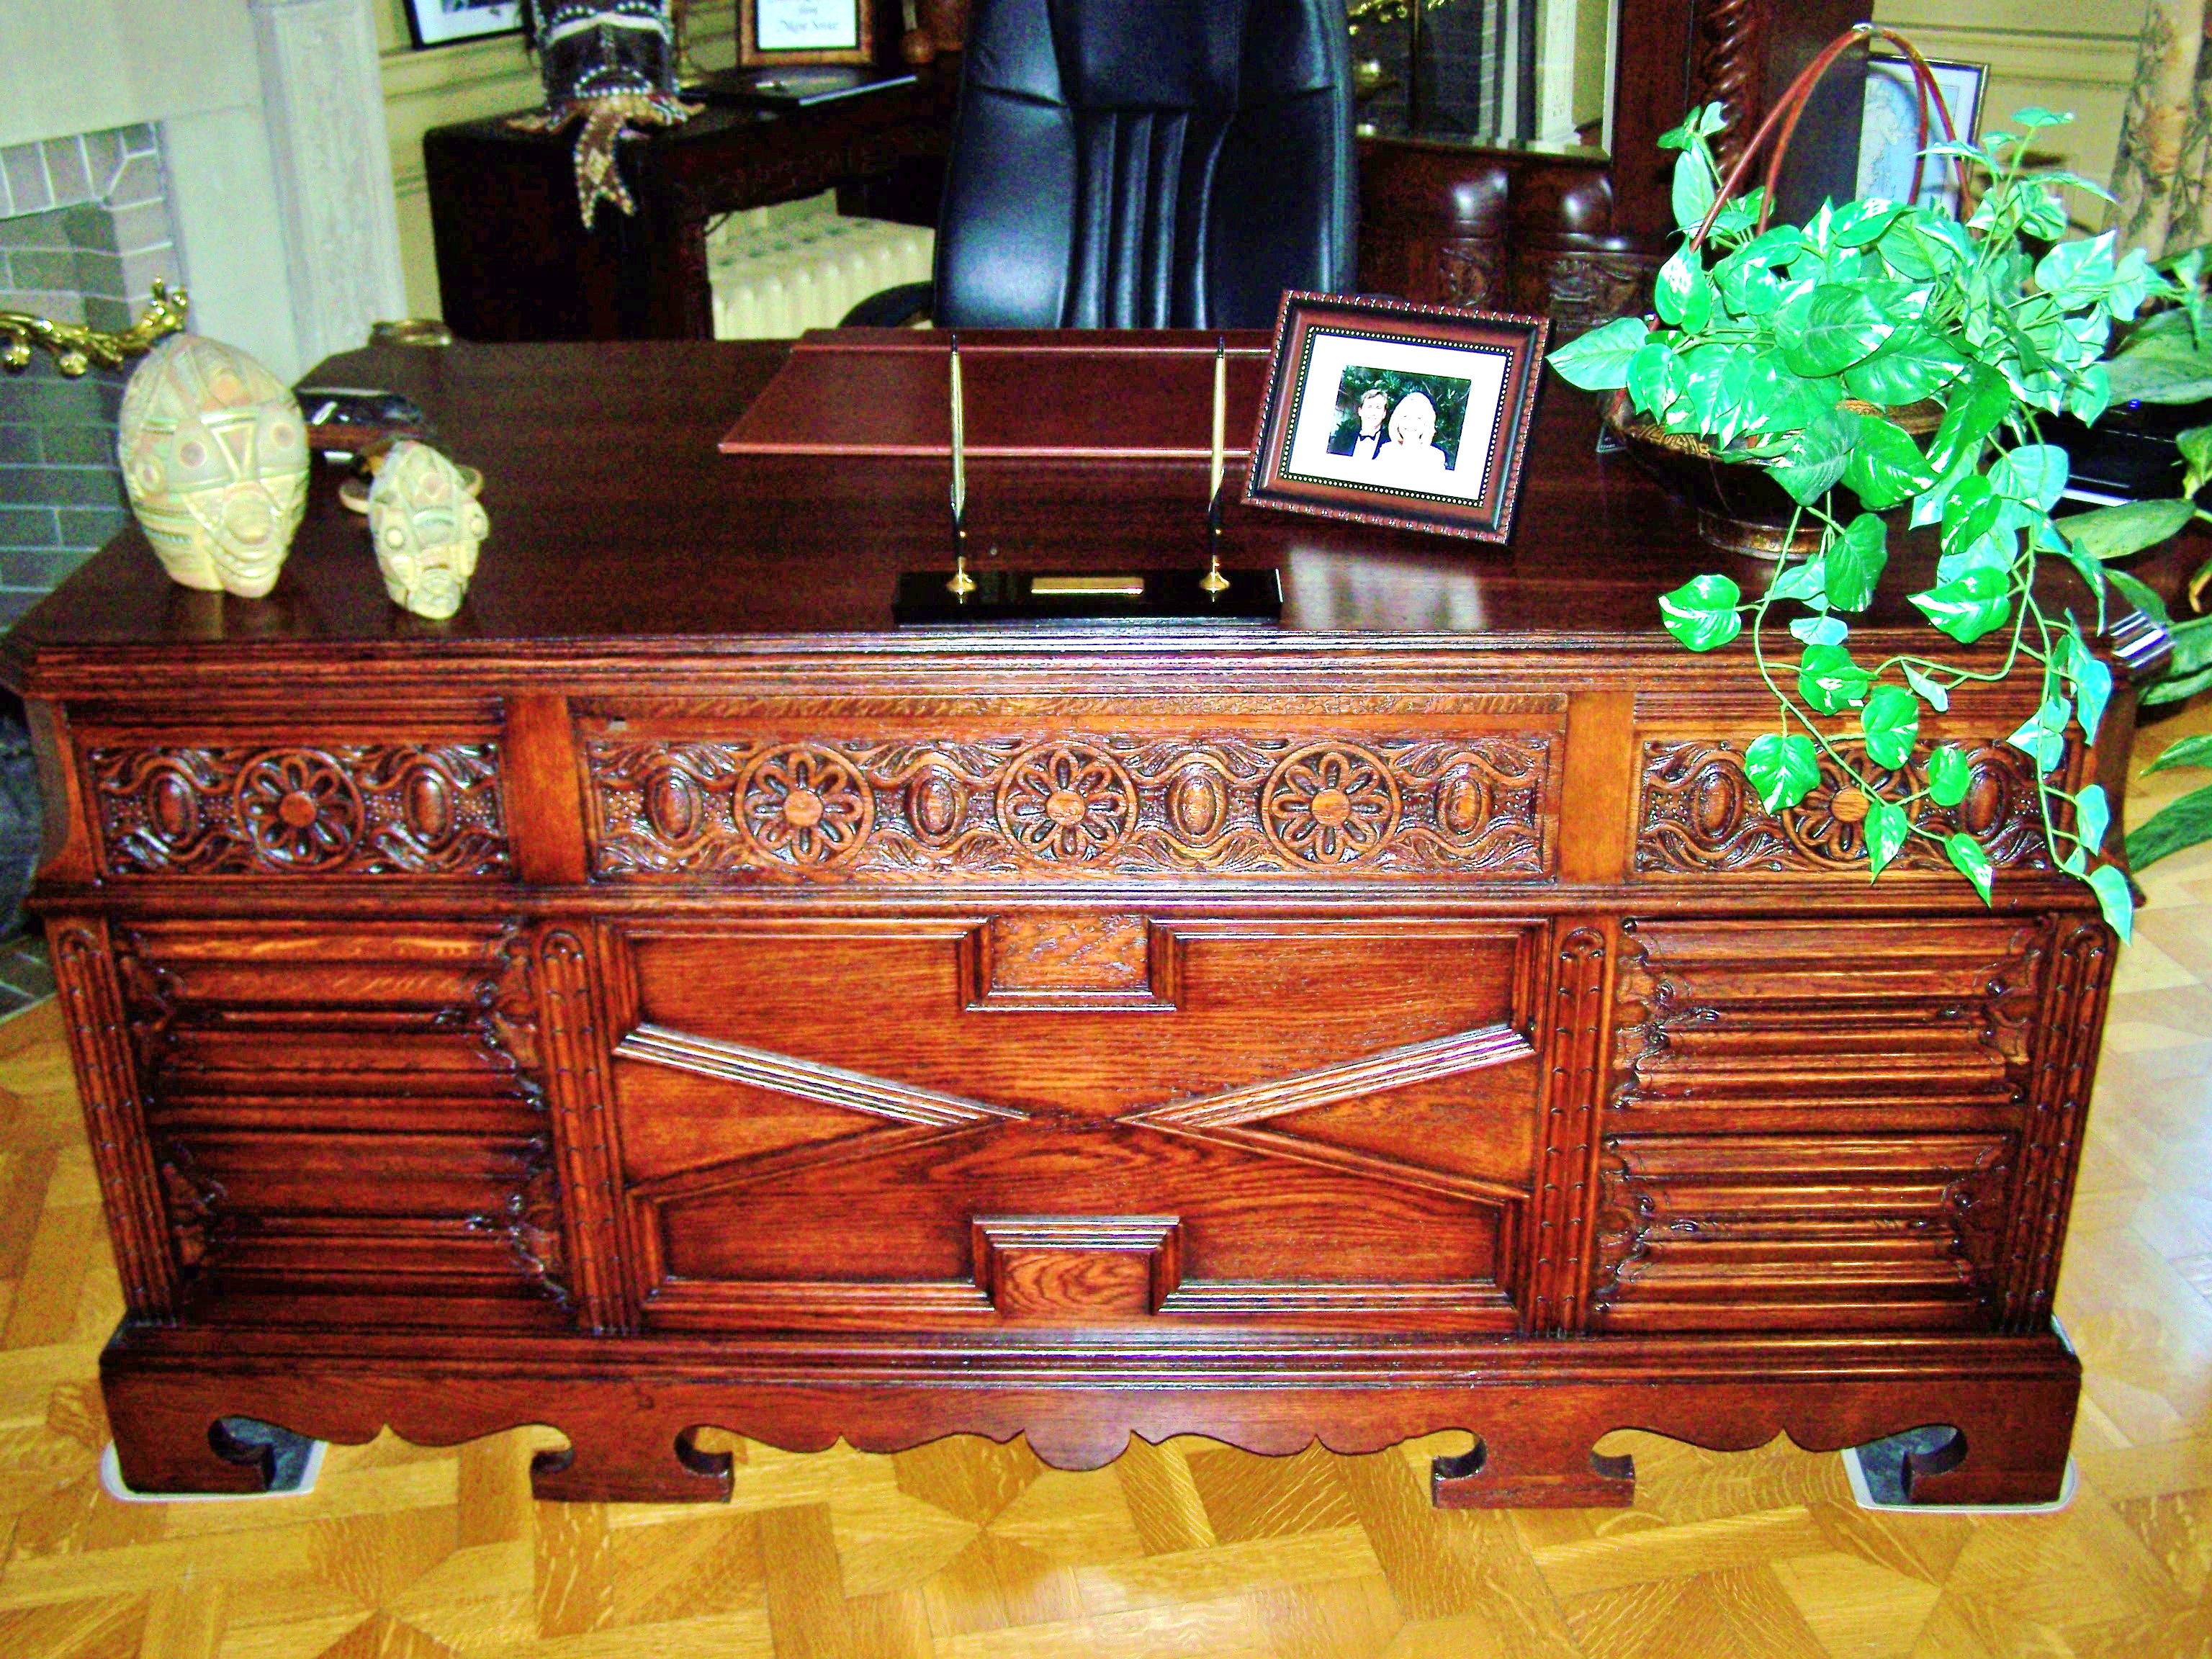 Archbishop Desk This Desk Was Used By Many Milwaukee Archbishops At The Pabst Mansion, Which Used To Be The Catholic Archdiocese Offices The Desk Was Purchased By An Individual Who Had It Restored As A Gift To Her Husband